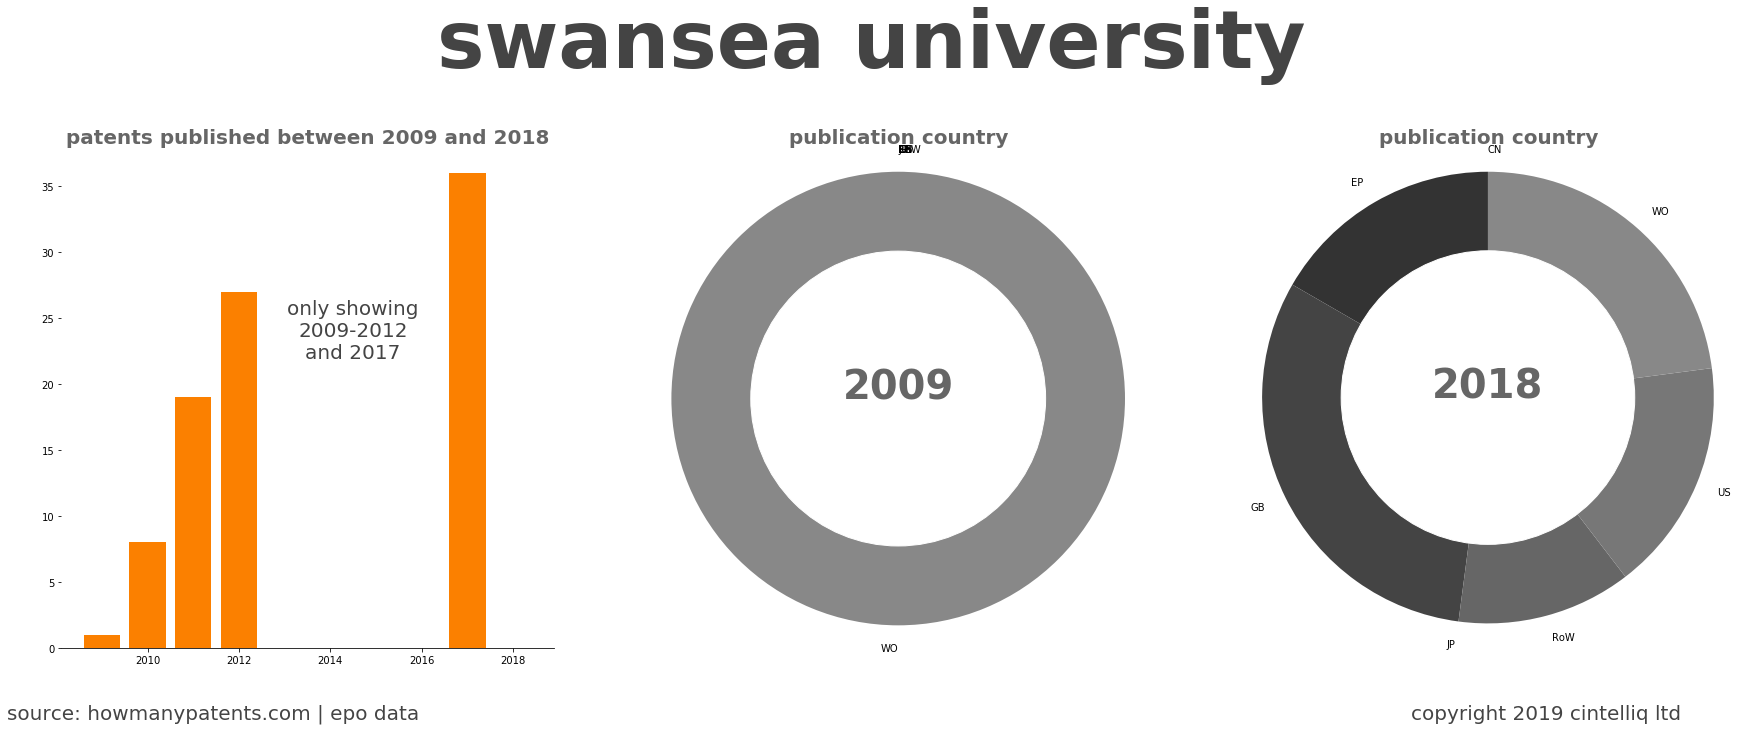 summary of patents for Swansea University